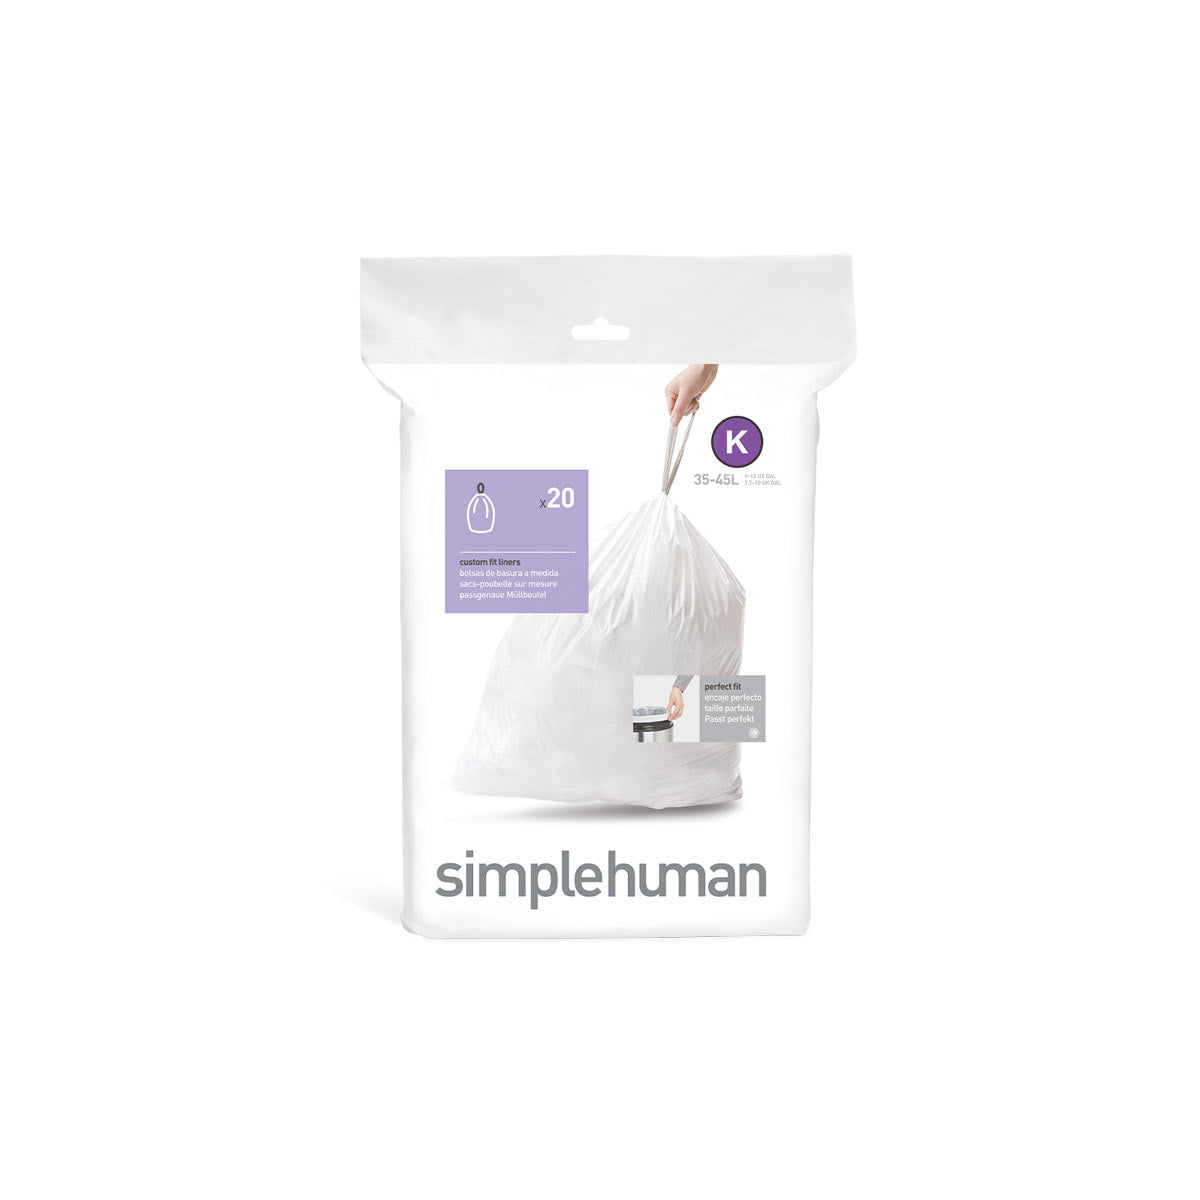  Code K 100 Count,Compatible with Simplehuman Code K